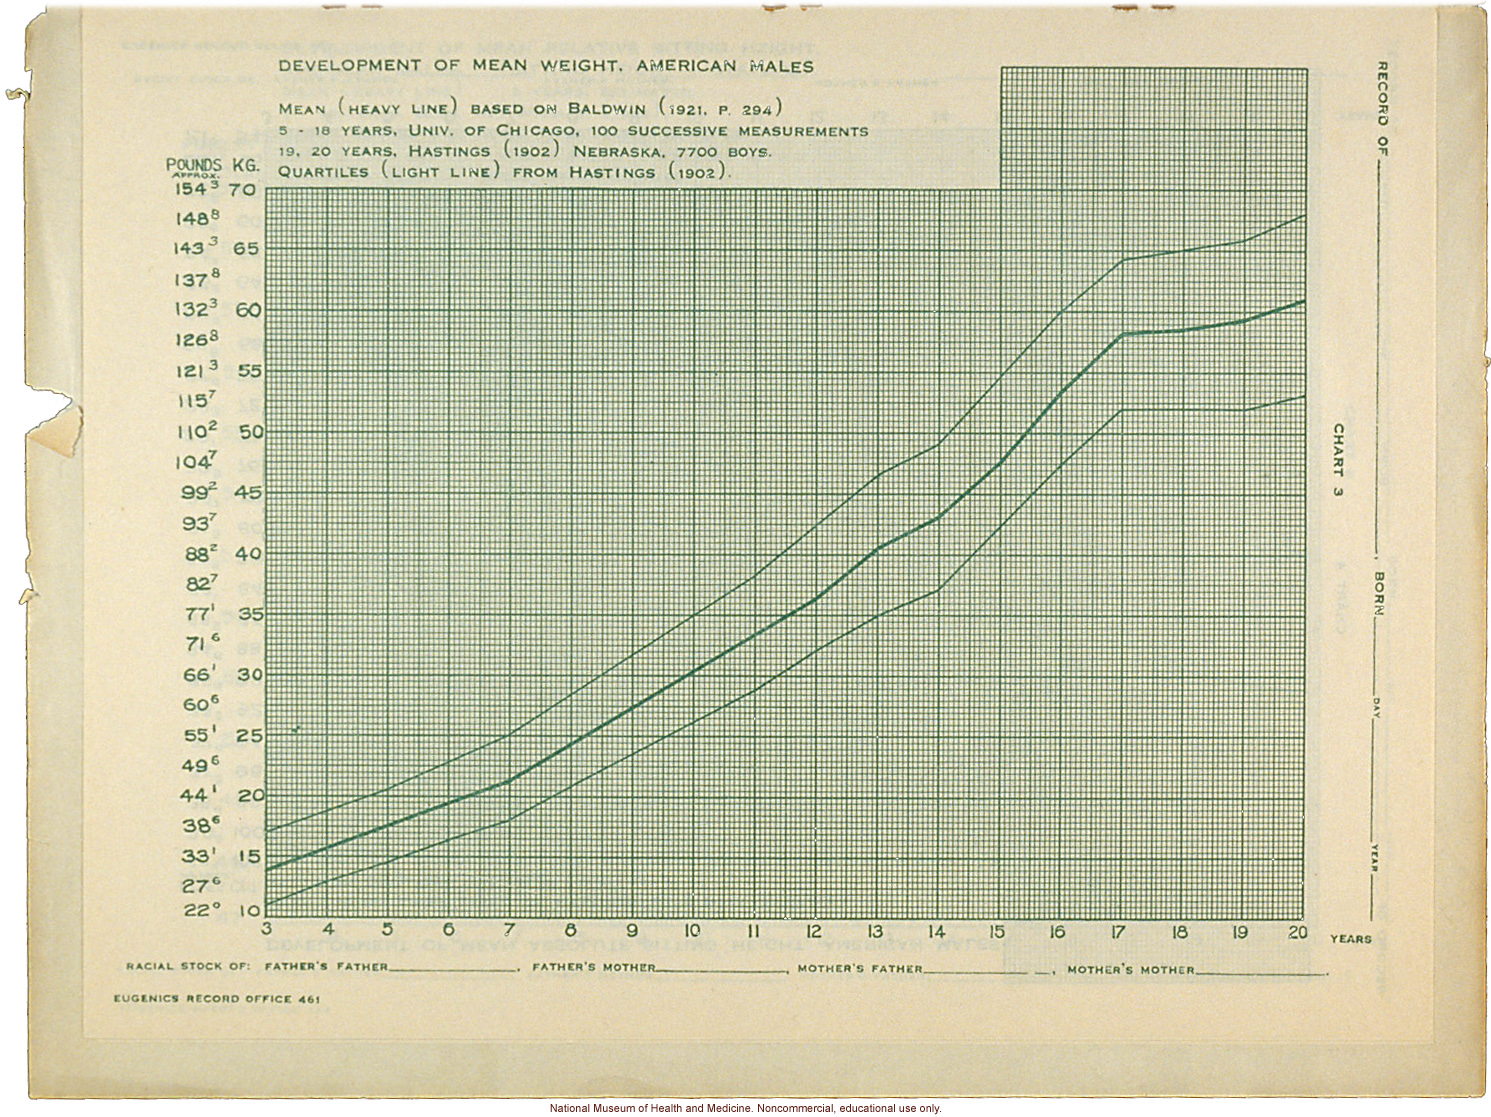 &quote;Physical Development Record for American Males,&quote; Eugenics Record Office (including forms, directions, and growth graphs)